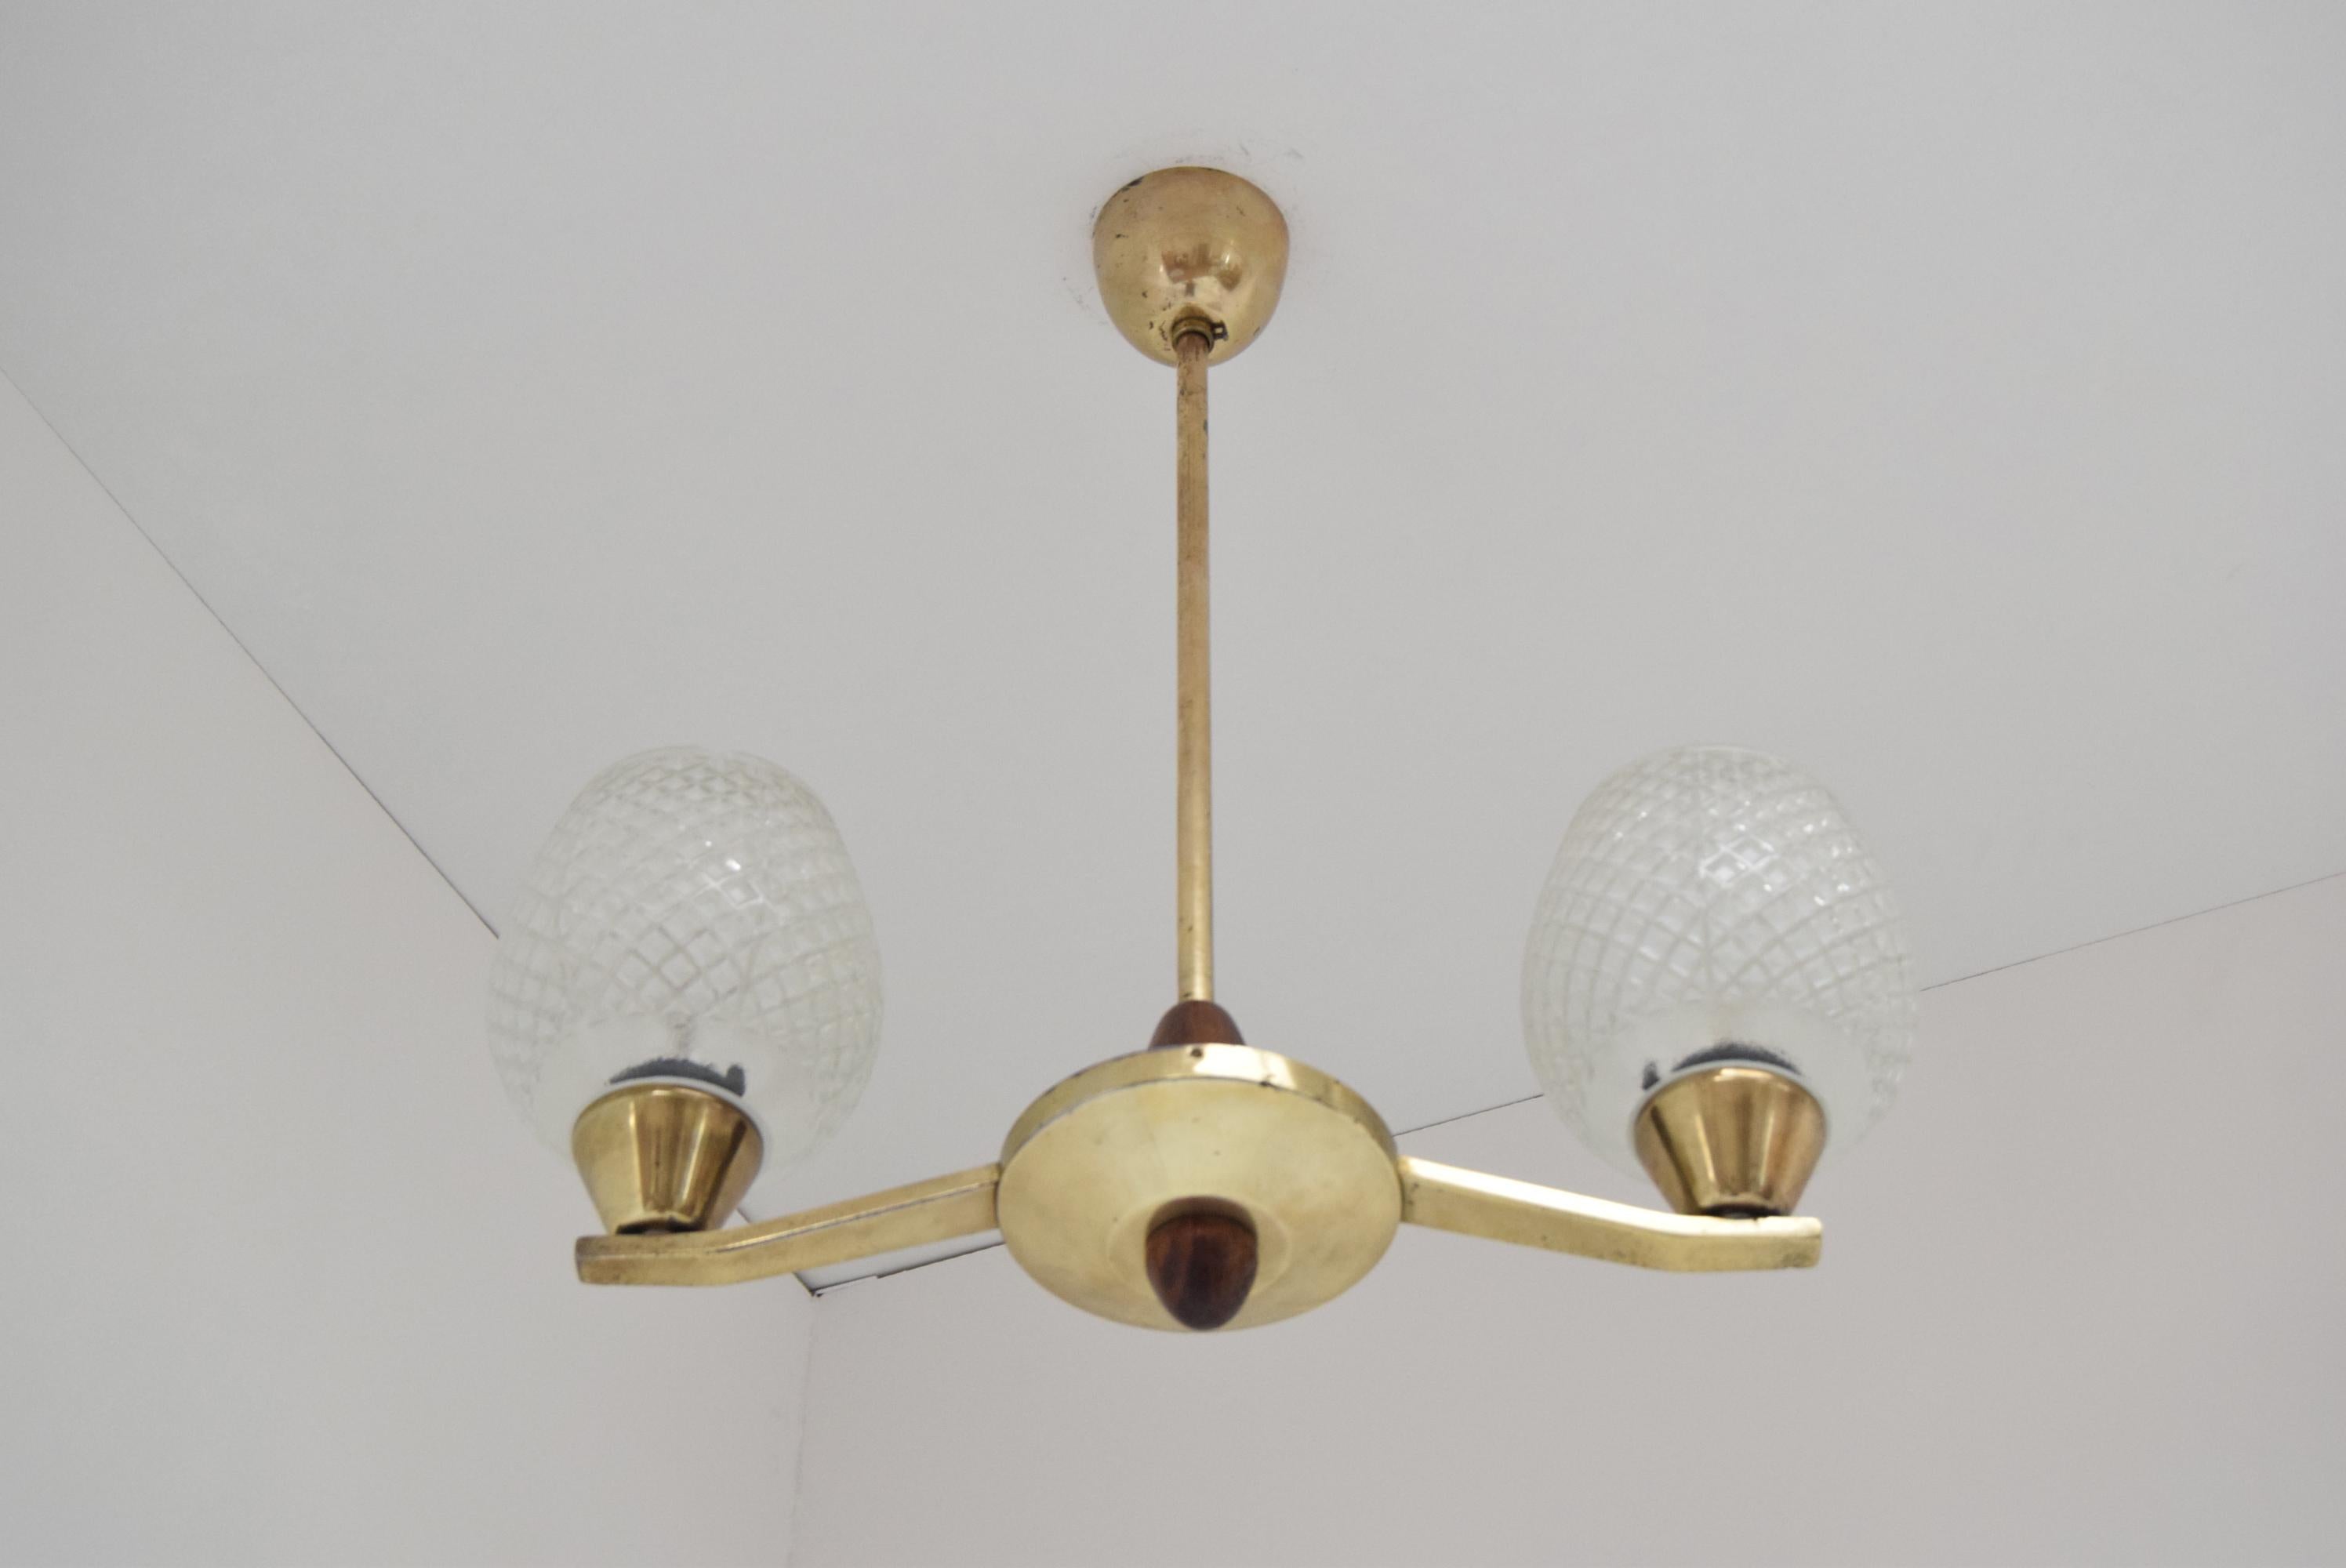 Czech Mid-century Chandelier by Lidokov, 1960‘s For Sale